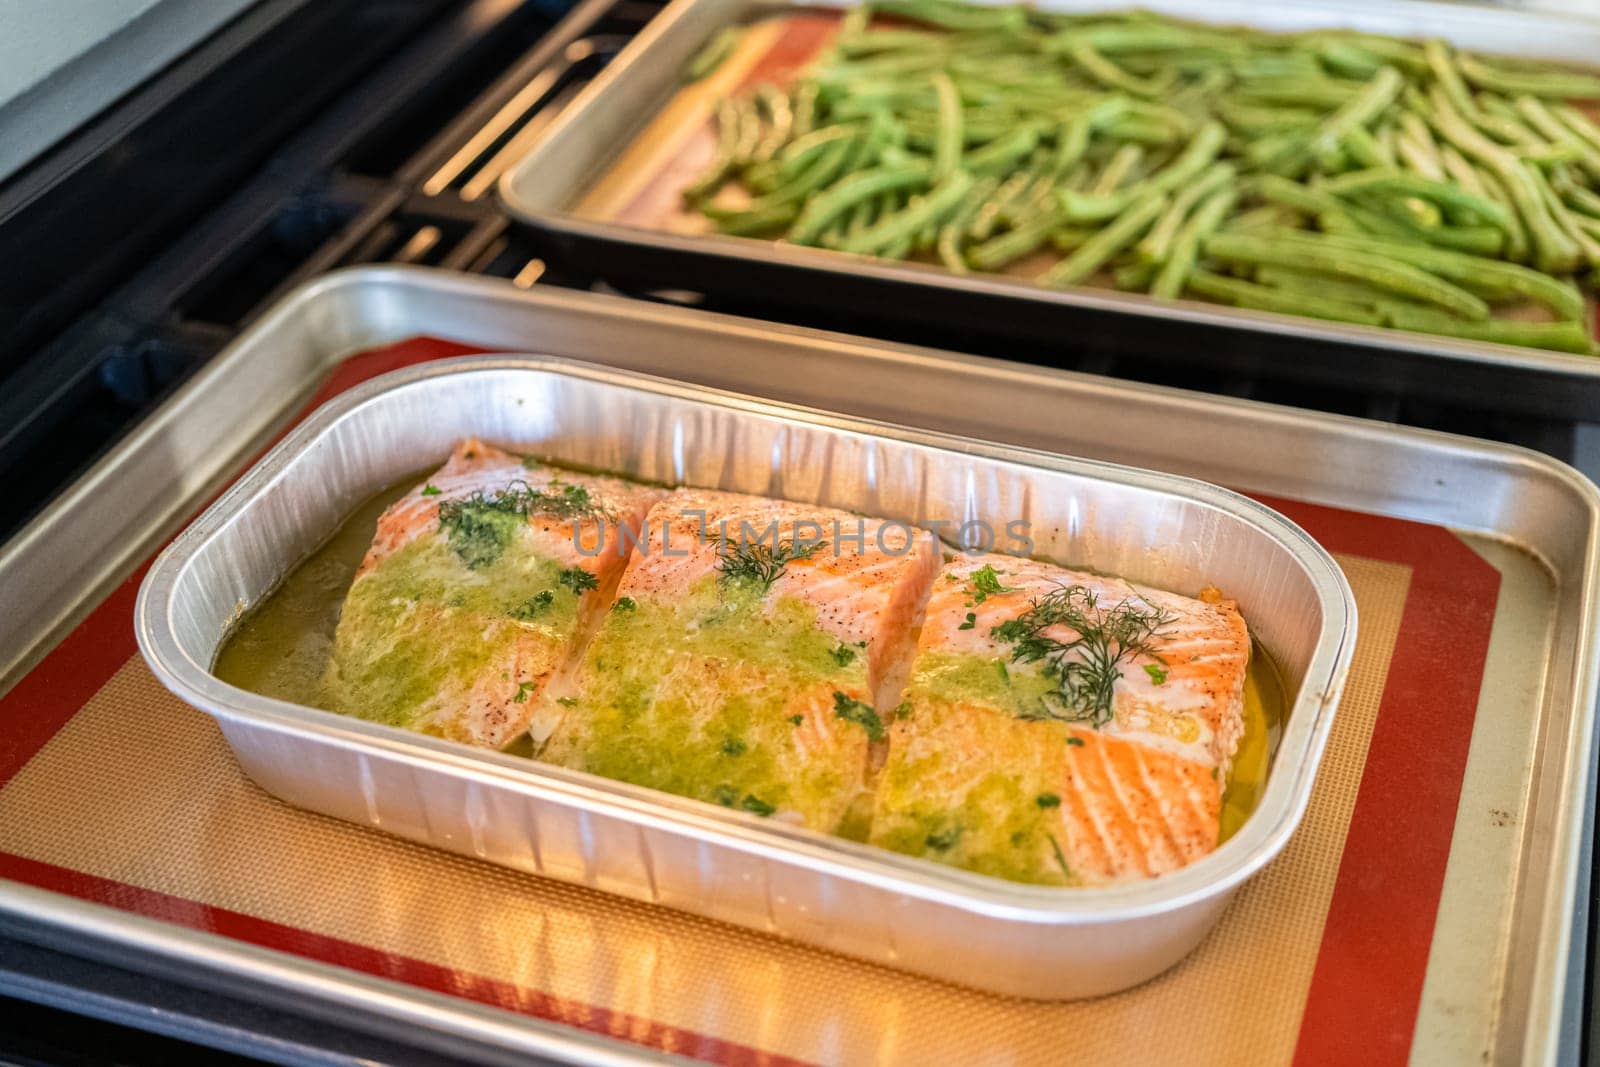 Discover the mouthwatering journey of salmon as it's cooked to perfection in an oven, nestled in a foil tray, adorned with rich butter and tantalizing spices.